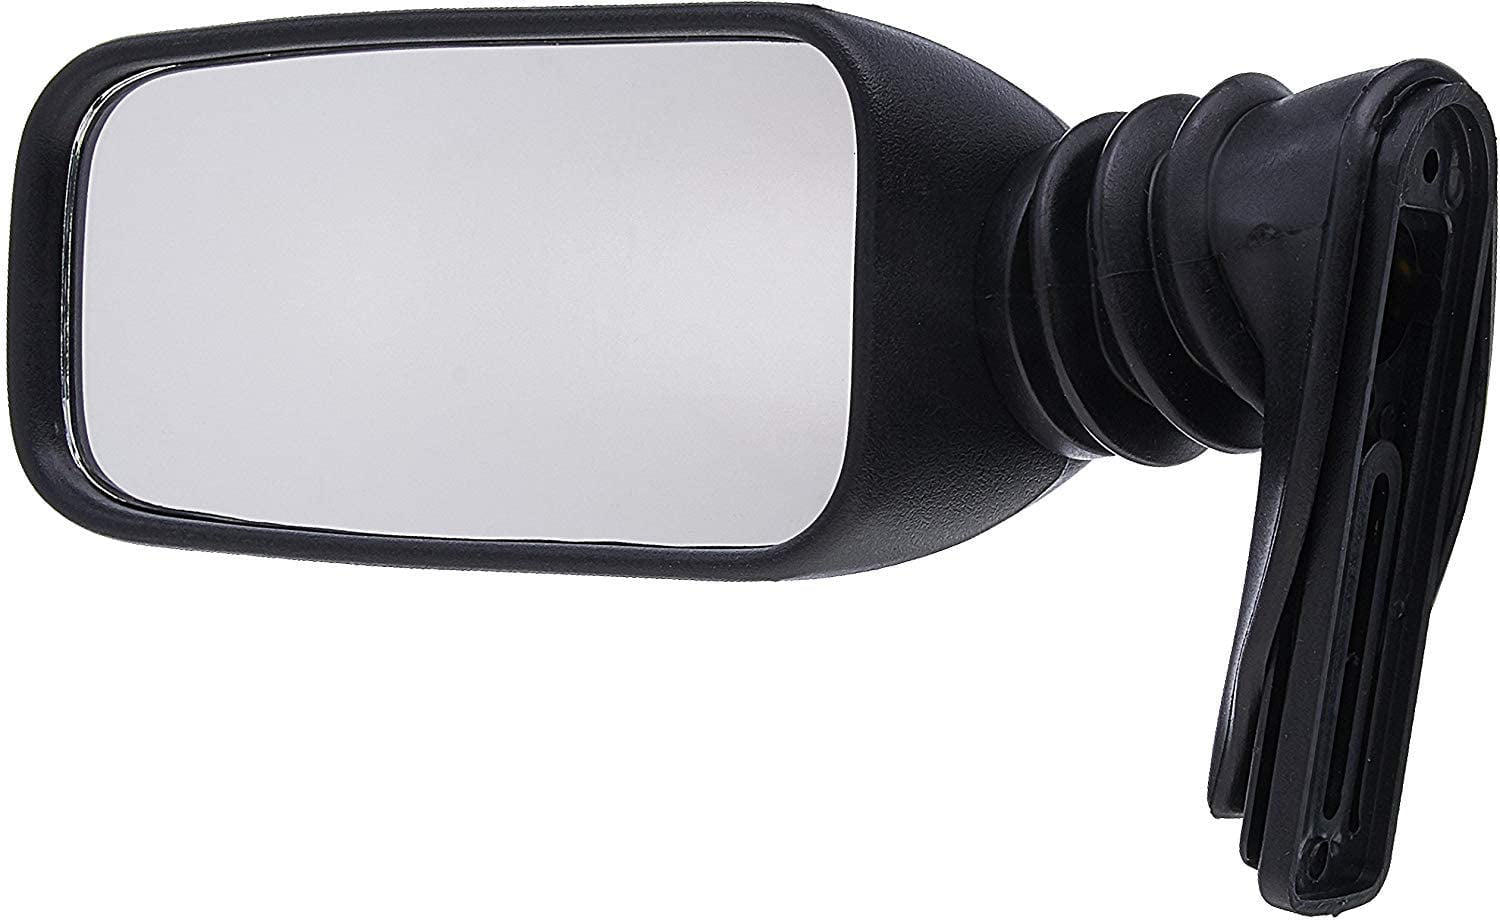 How to Fix a Rearview Mirror » NAPA Blog